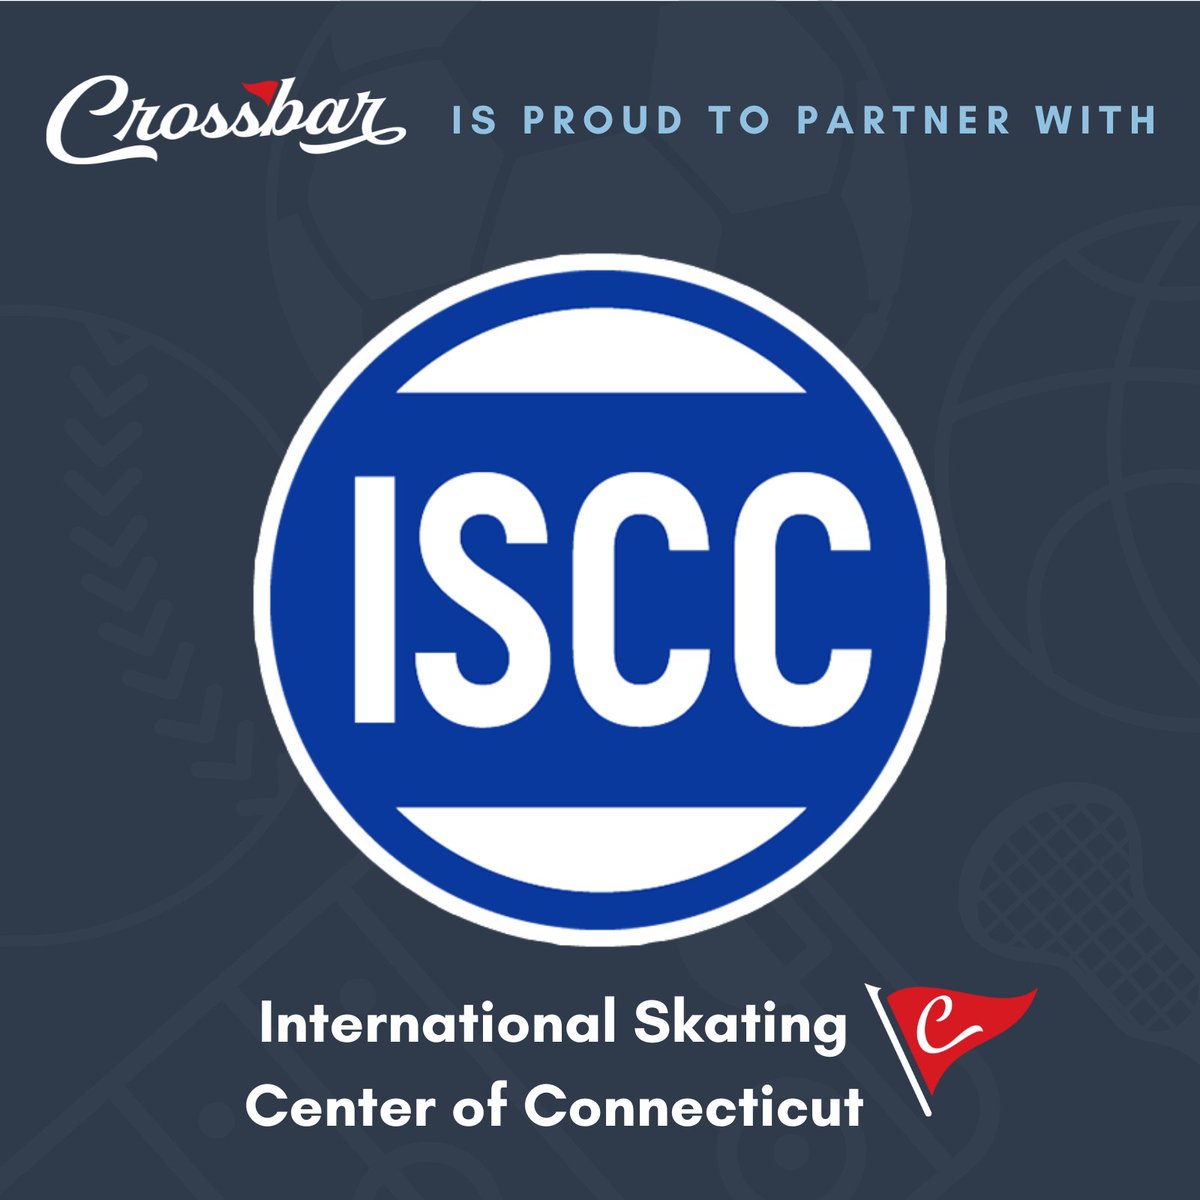 These amazing clubs and teams have signed onto Crossbar! Welcome @FenwickHockey, Morgantown Hockey Association, Hot Wheels Hockey Club, and @isccskate2! #sportsmanagementsoftware #hockeyclubs #skatingclubs #leaguemanagement #facilitymanagement #clubmanagement